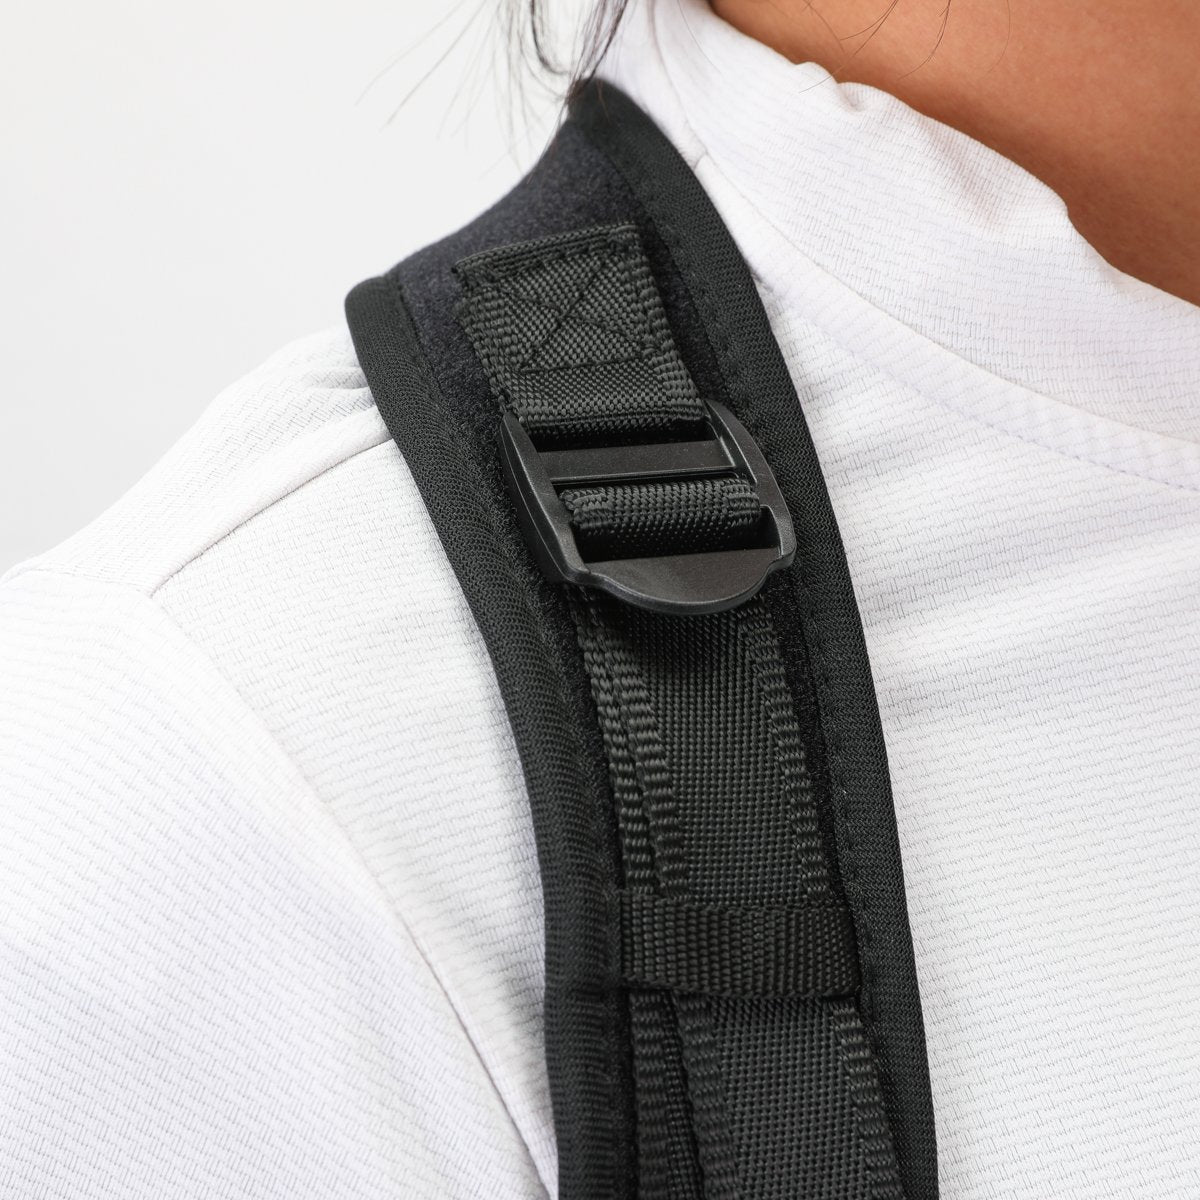 Back Support Breathable Posture Corrector Pain Relief